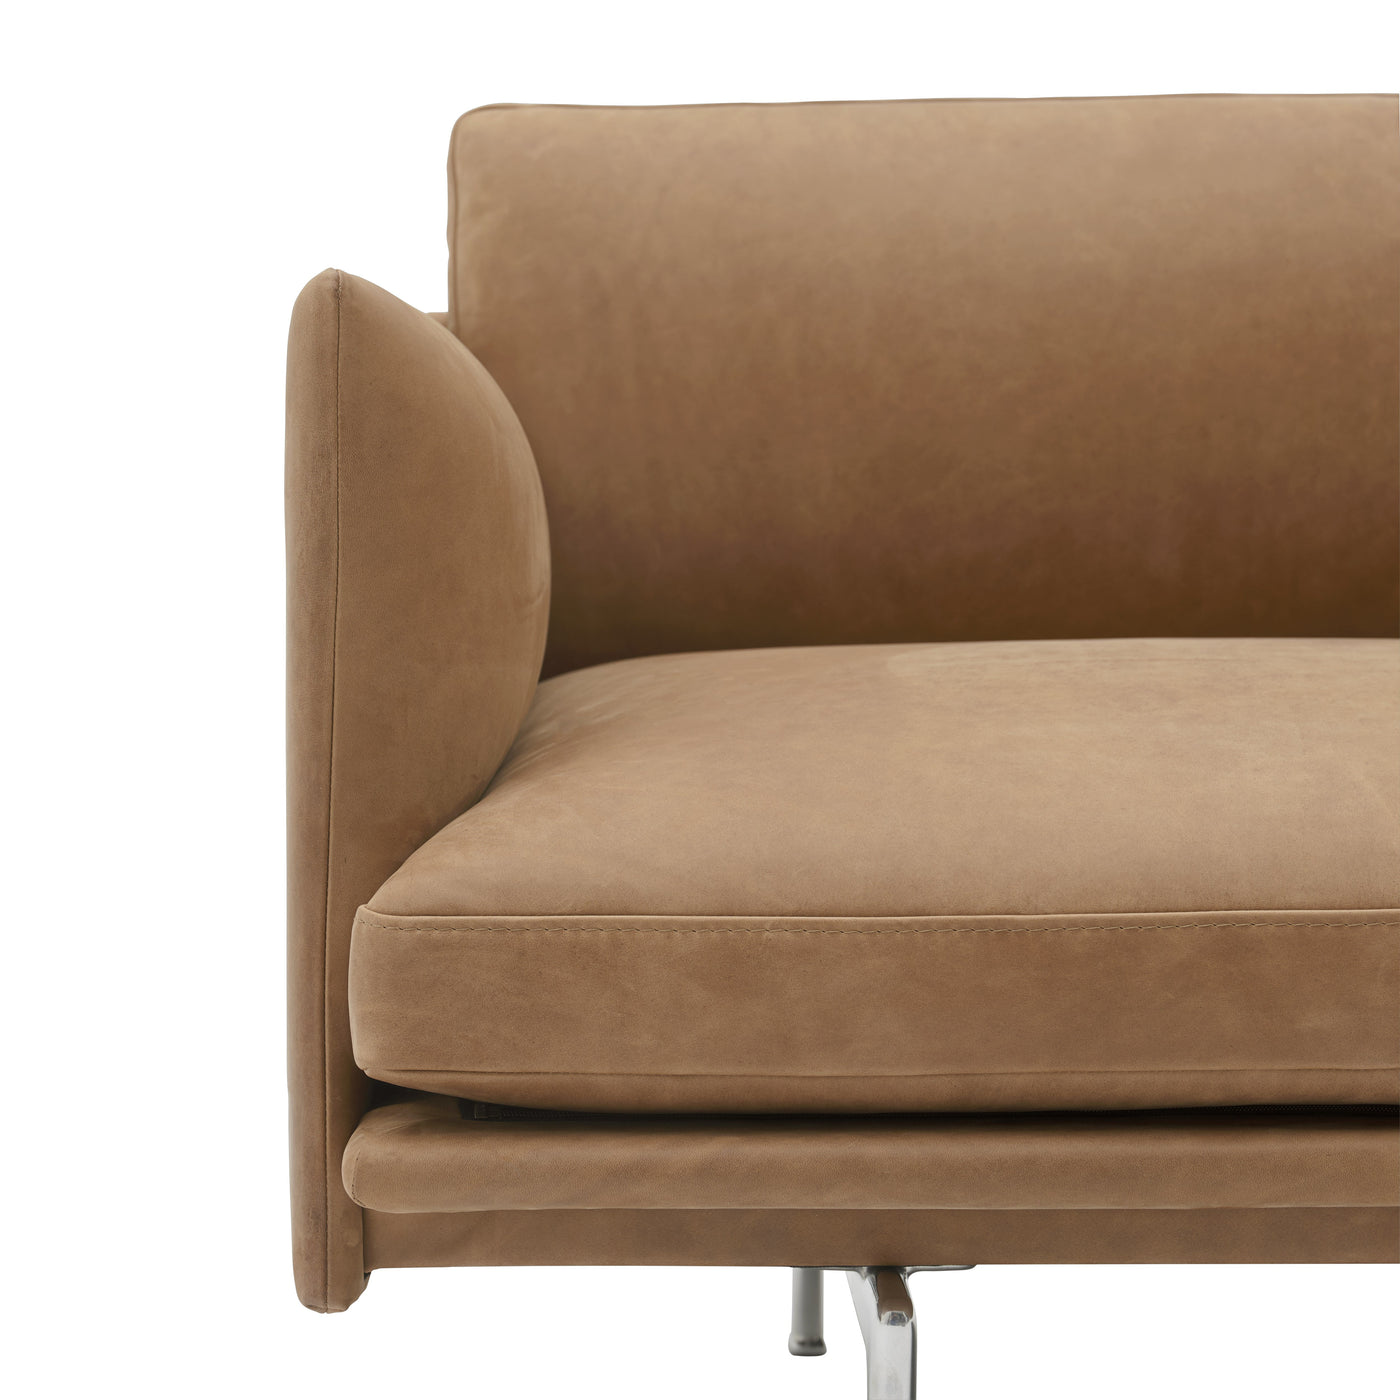 Muuto Outline Chaise Longue sofa in grace leather. Made to order from someday designs. #colour_camel-grace-leather